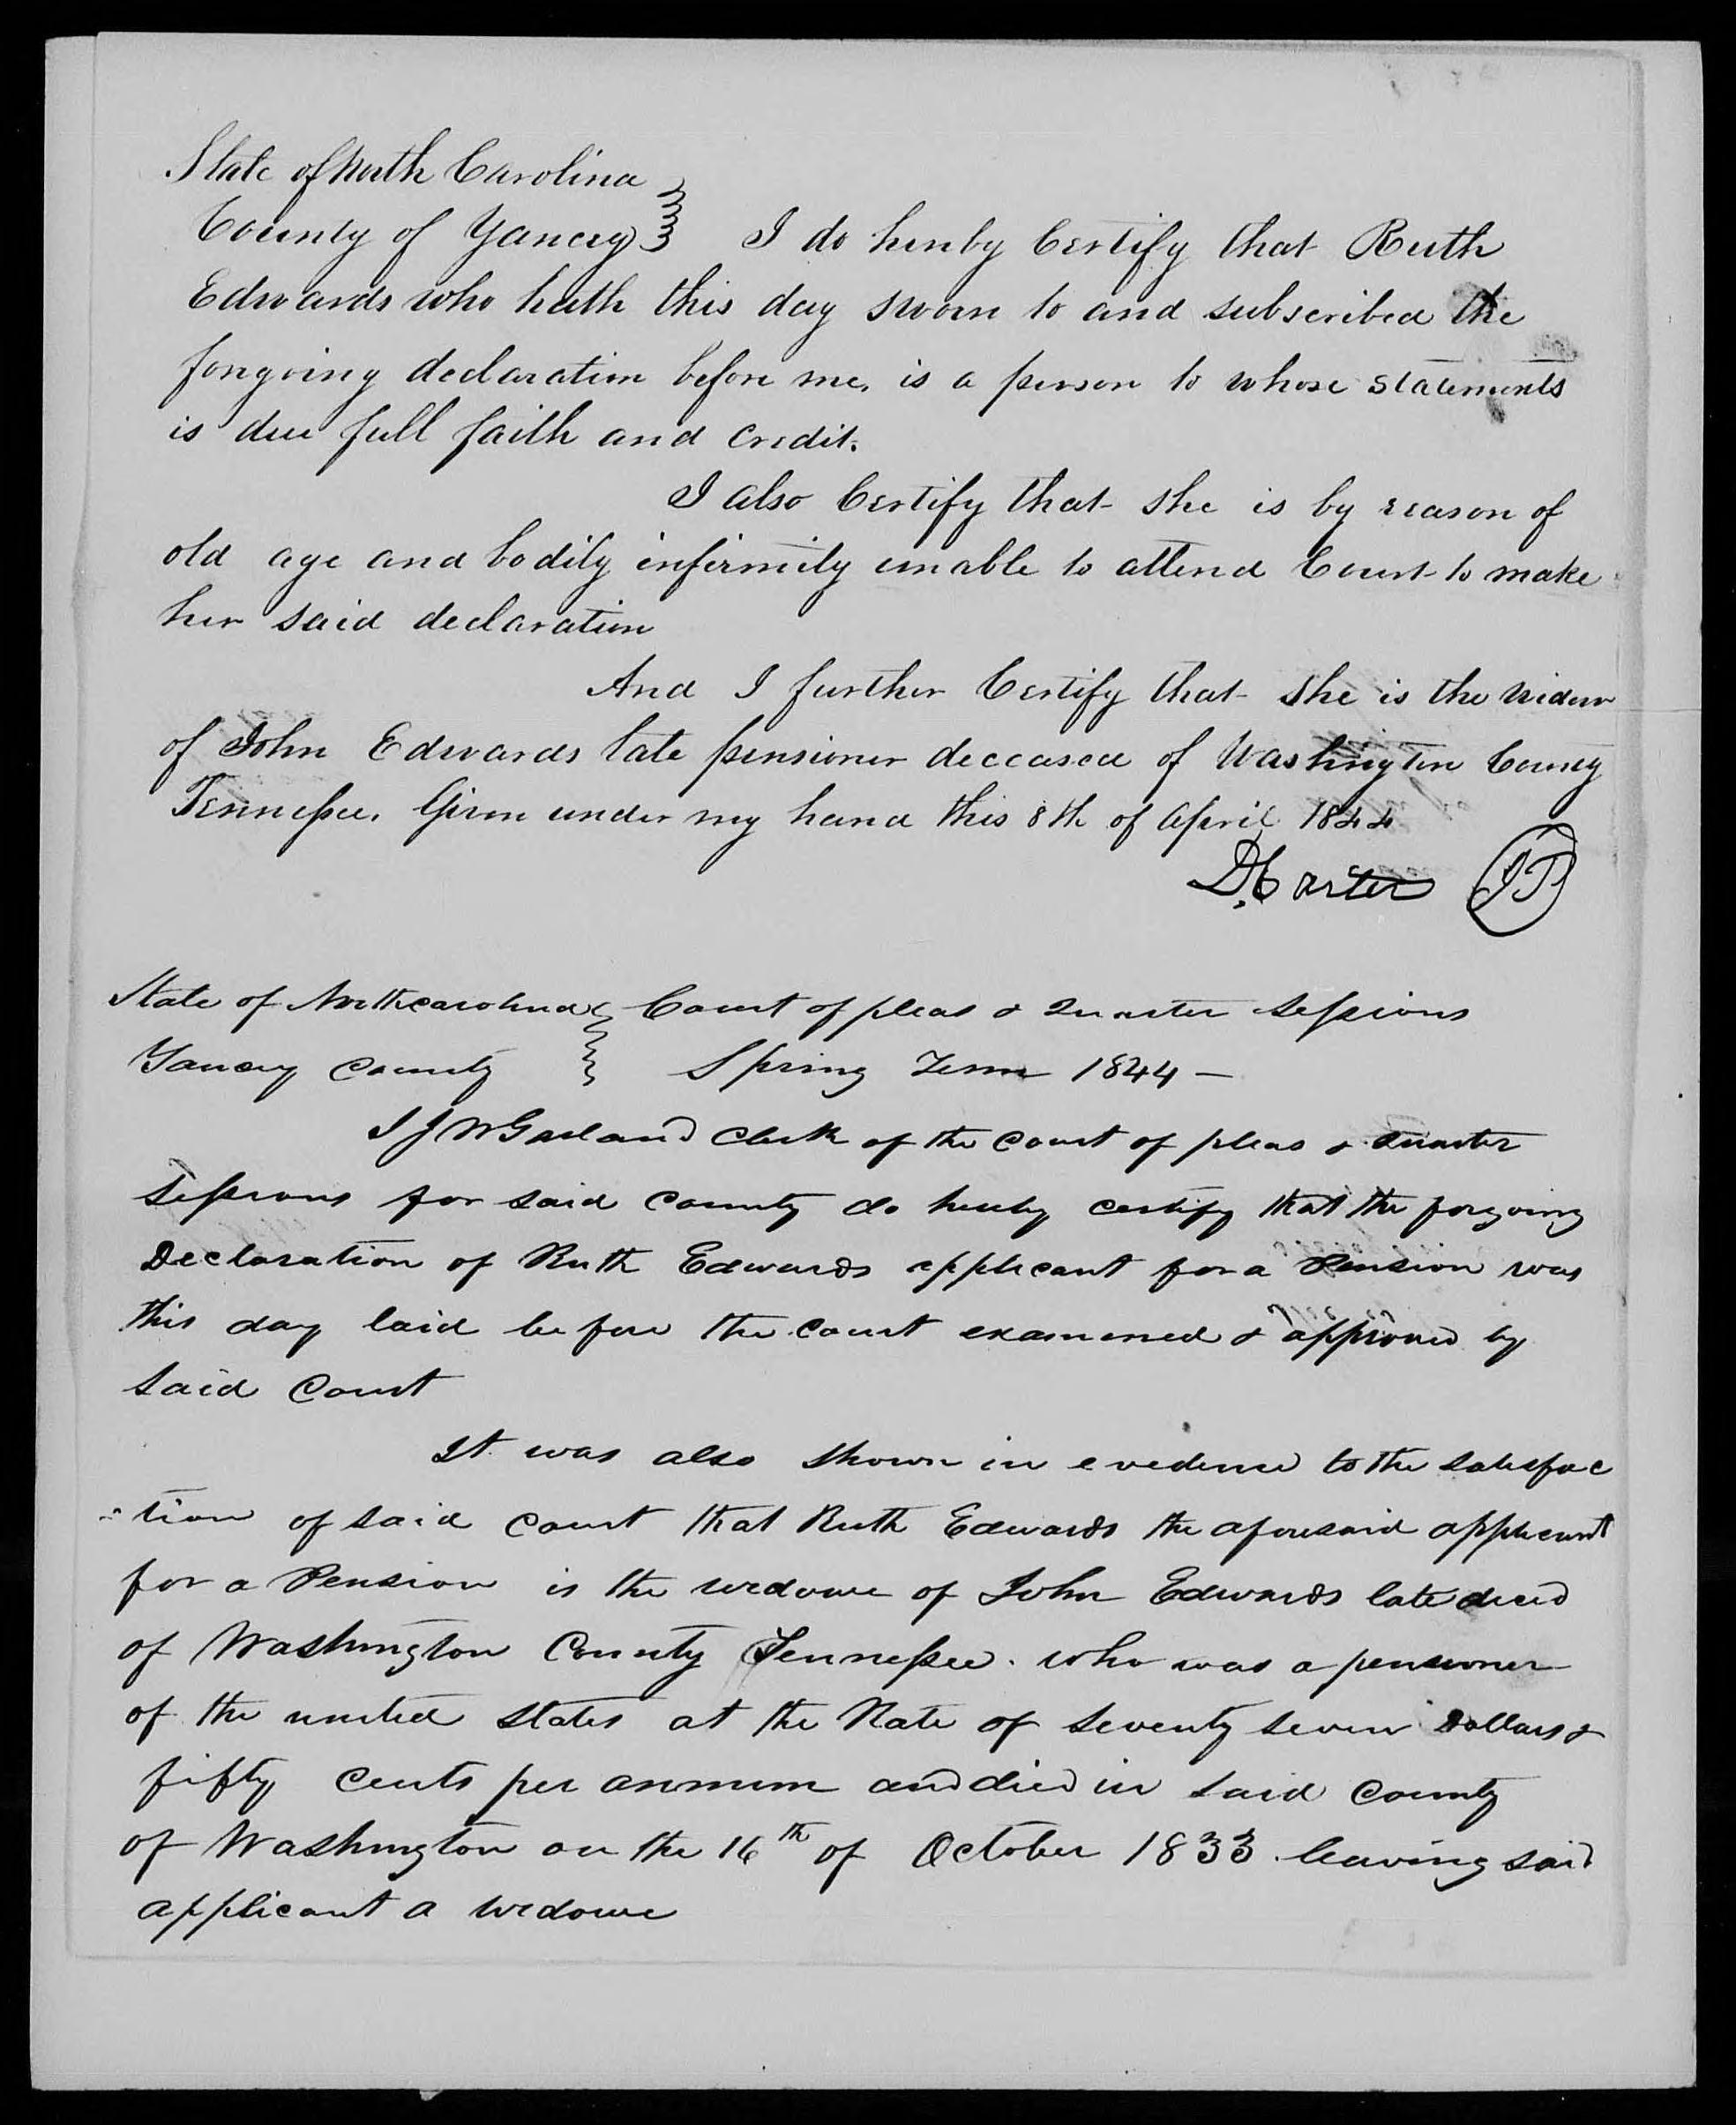 Application for a Widow's Pension from Ruth Edwards, 8 April 1833, page 2